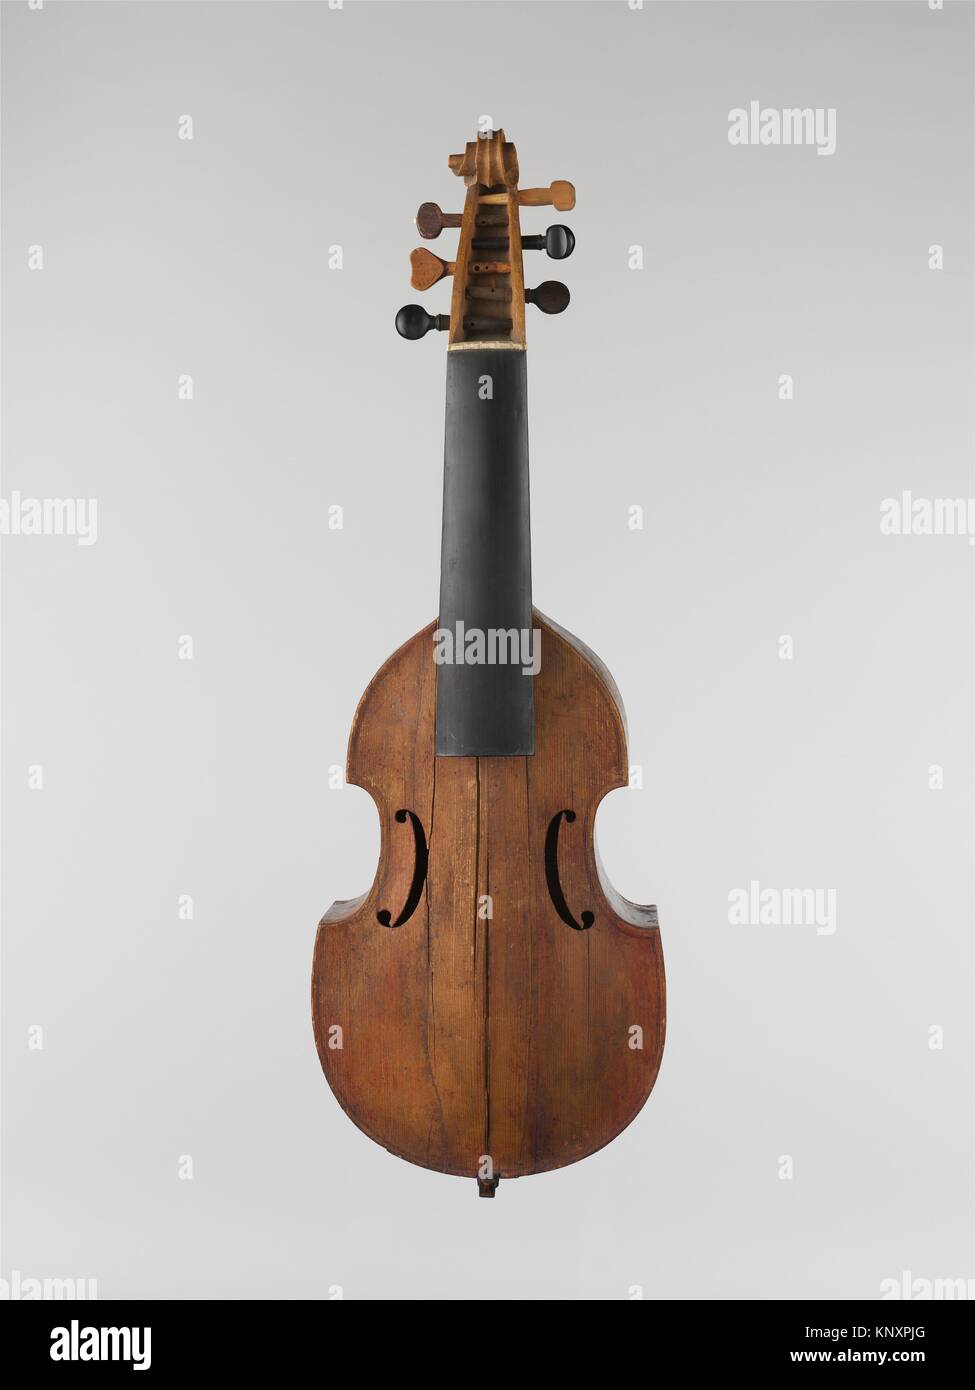 Treble Viol. Maker: Jean Villiaume; Date: 1743; Geography: Mirecourt, France; Culture: French; Medium: Wood; Dimensions: Body length 35.8 cm,; Stock Photo